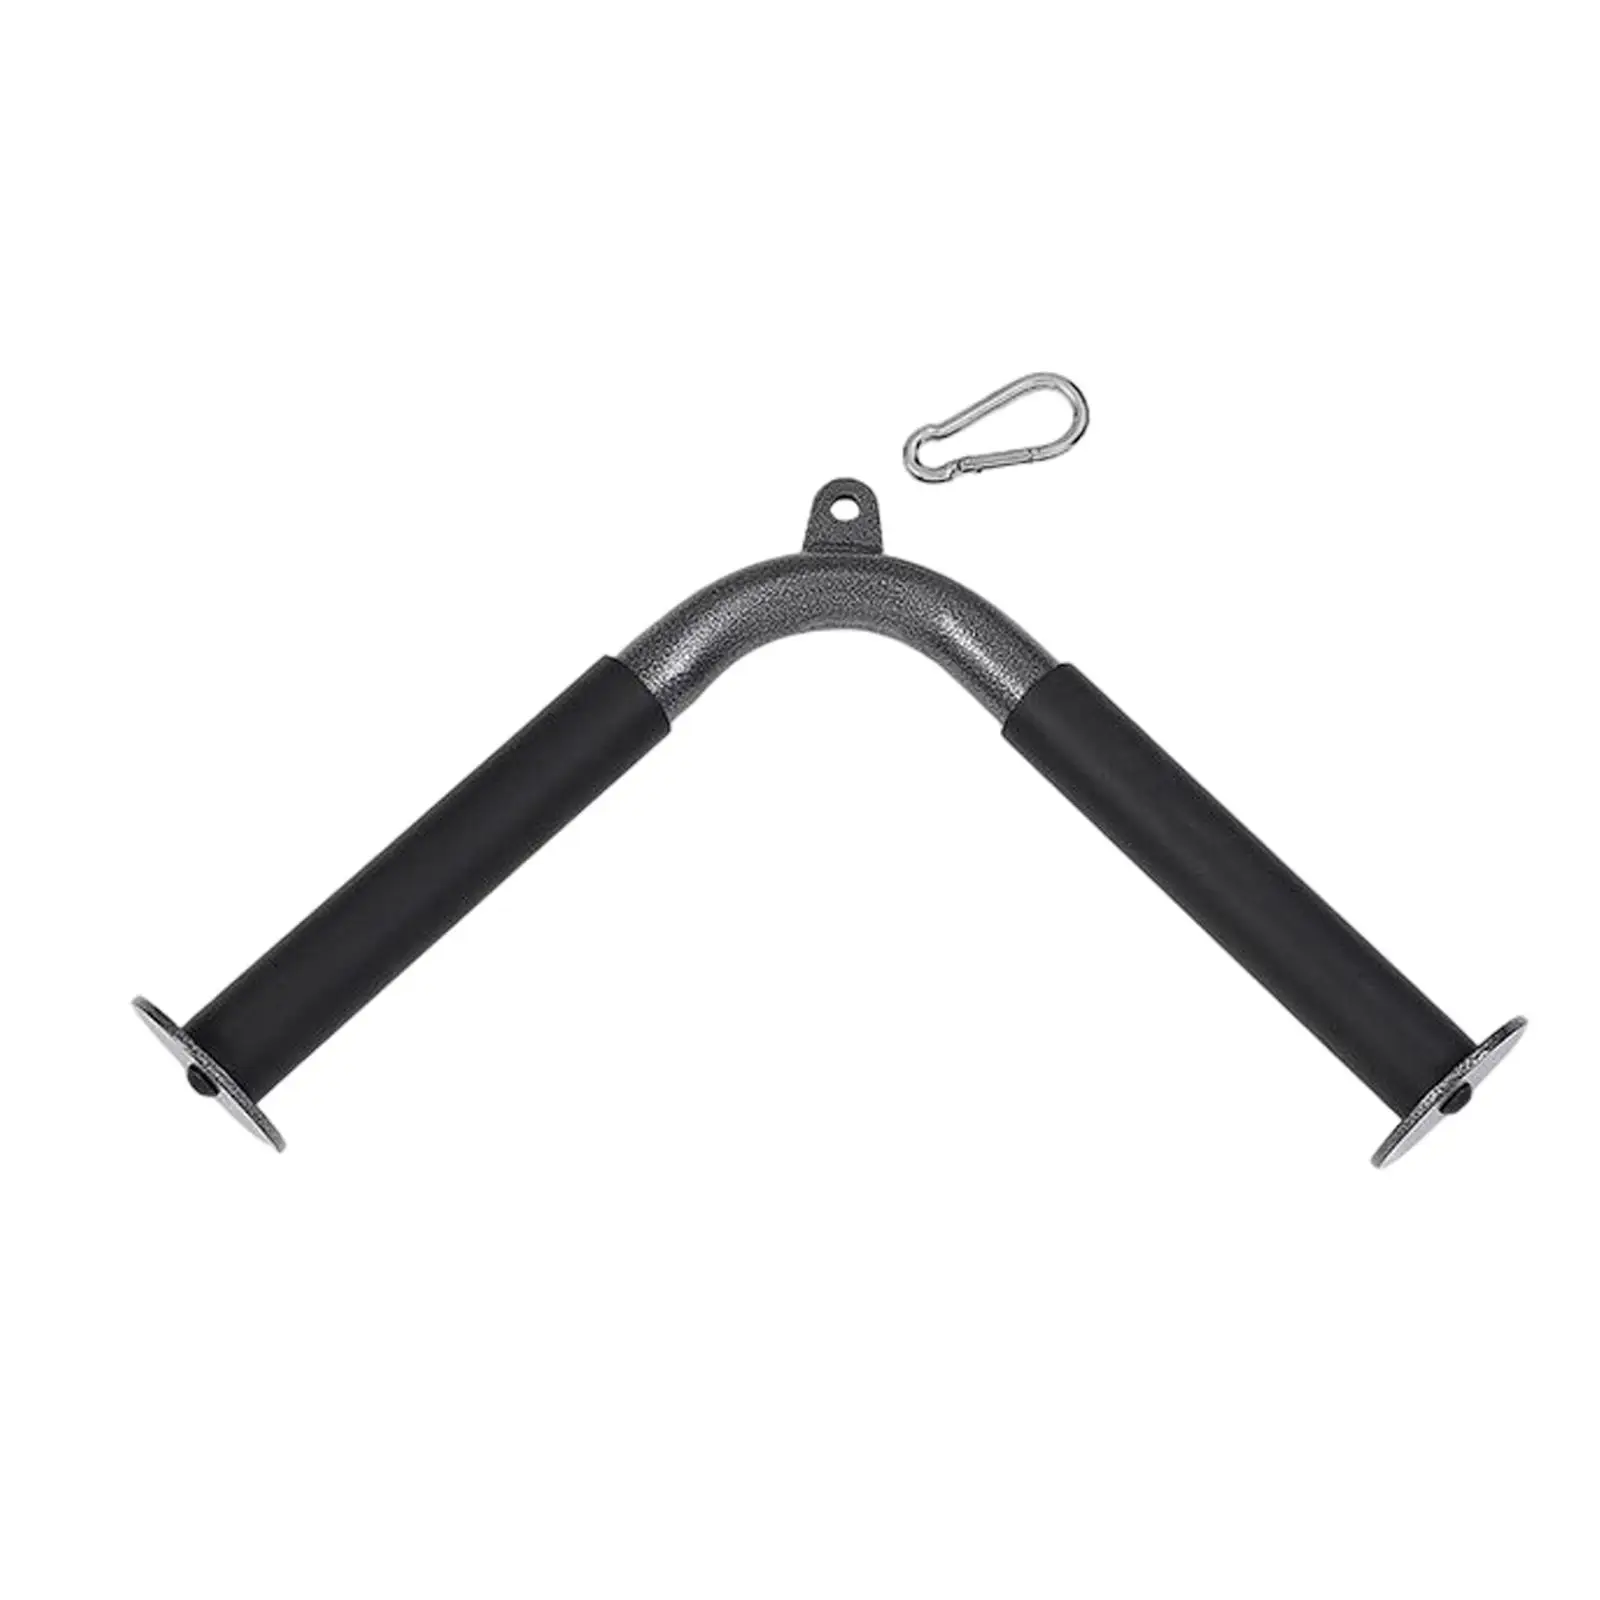 V Shaped Press Down Bar, Cable Machine Attachment, Strength Training, Double Handle for Workout Weight Lifting Exercise Fitness